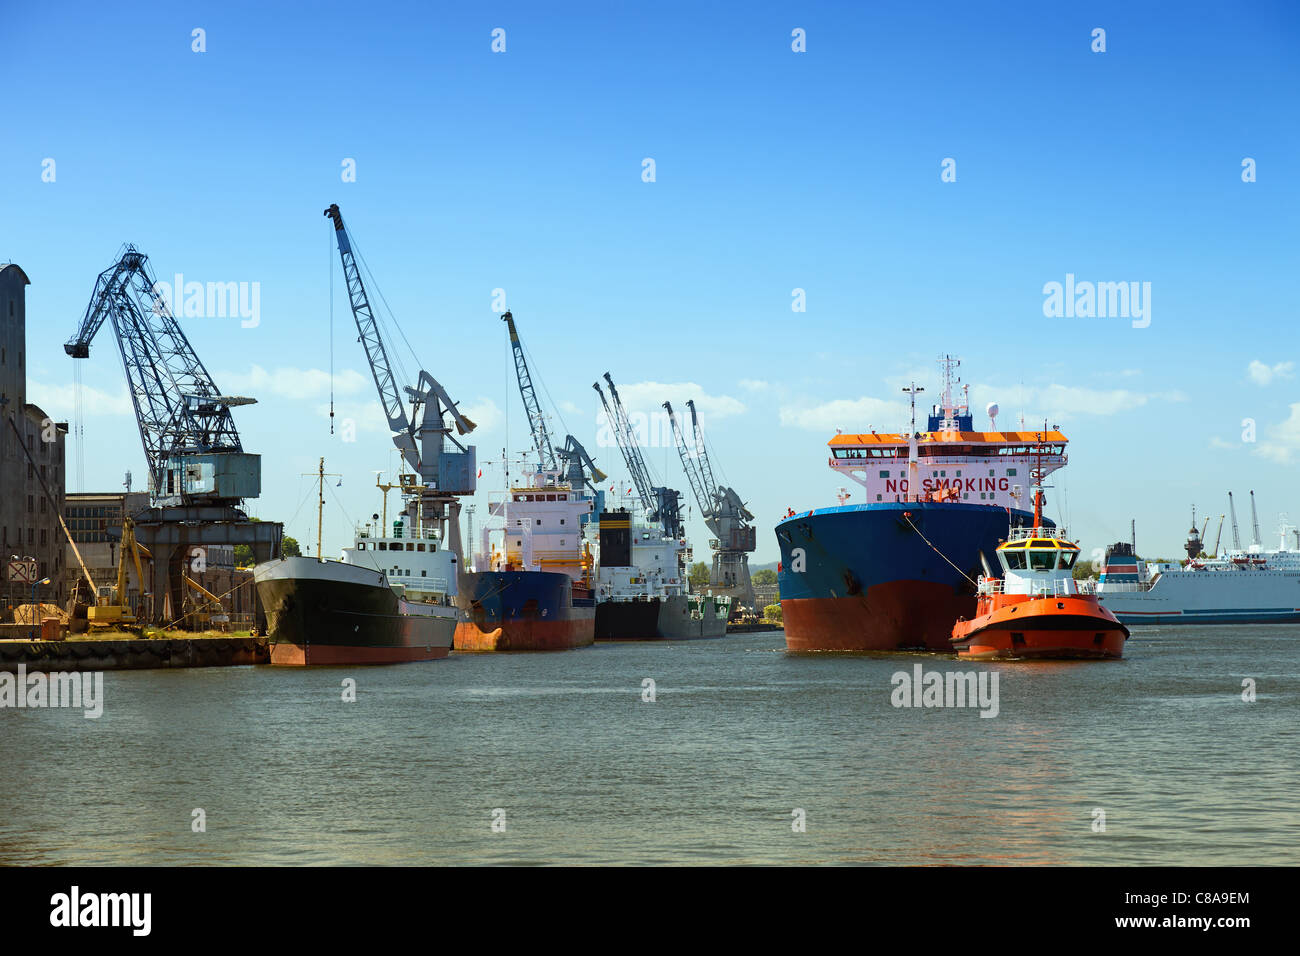 A large cargo ship enters the port escorted by tugboats. Gdansk, Poland. Stock Photo